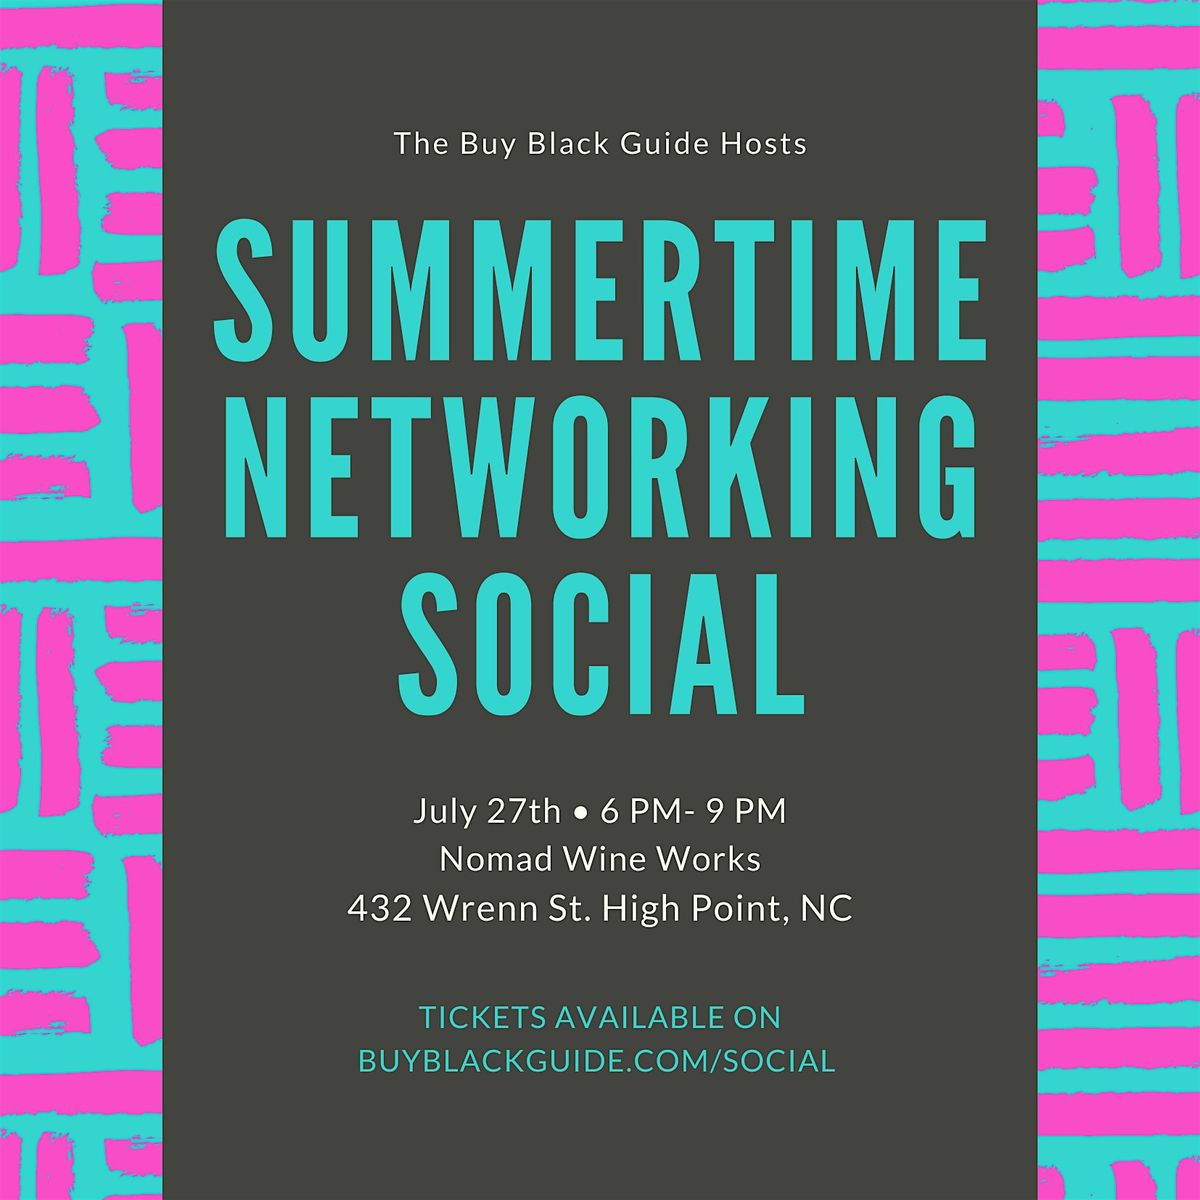 Summertime Networking Social hosted by The Buy Black Guide